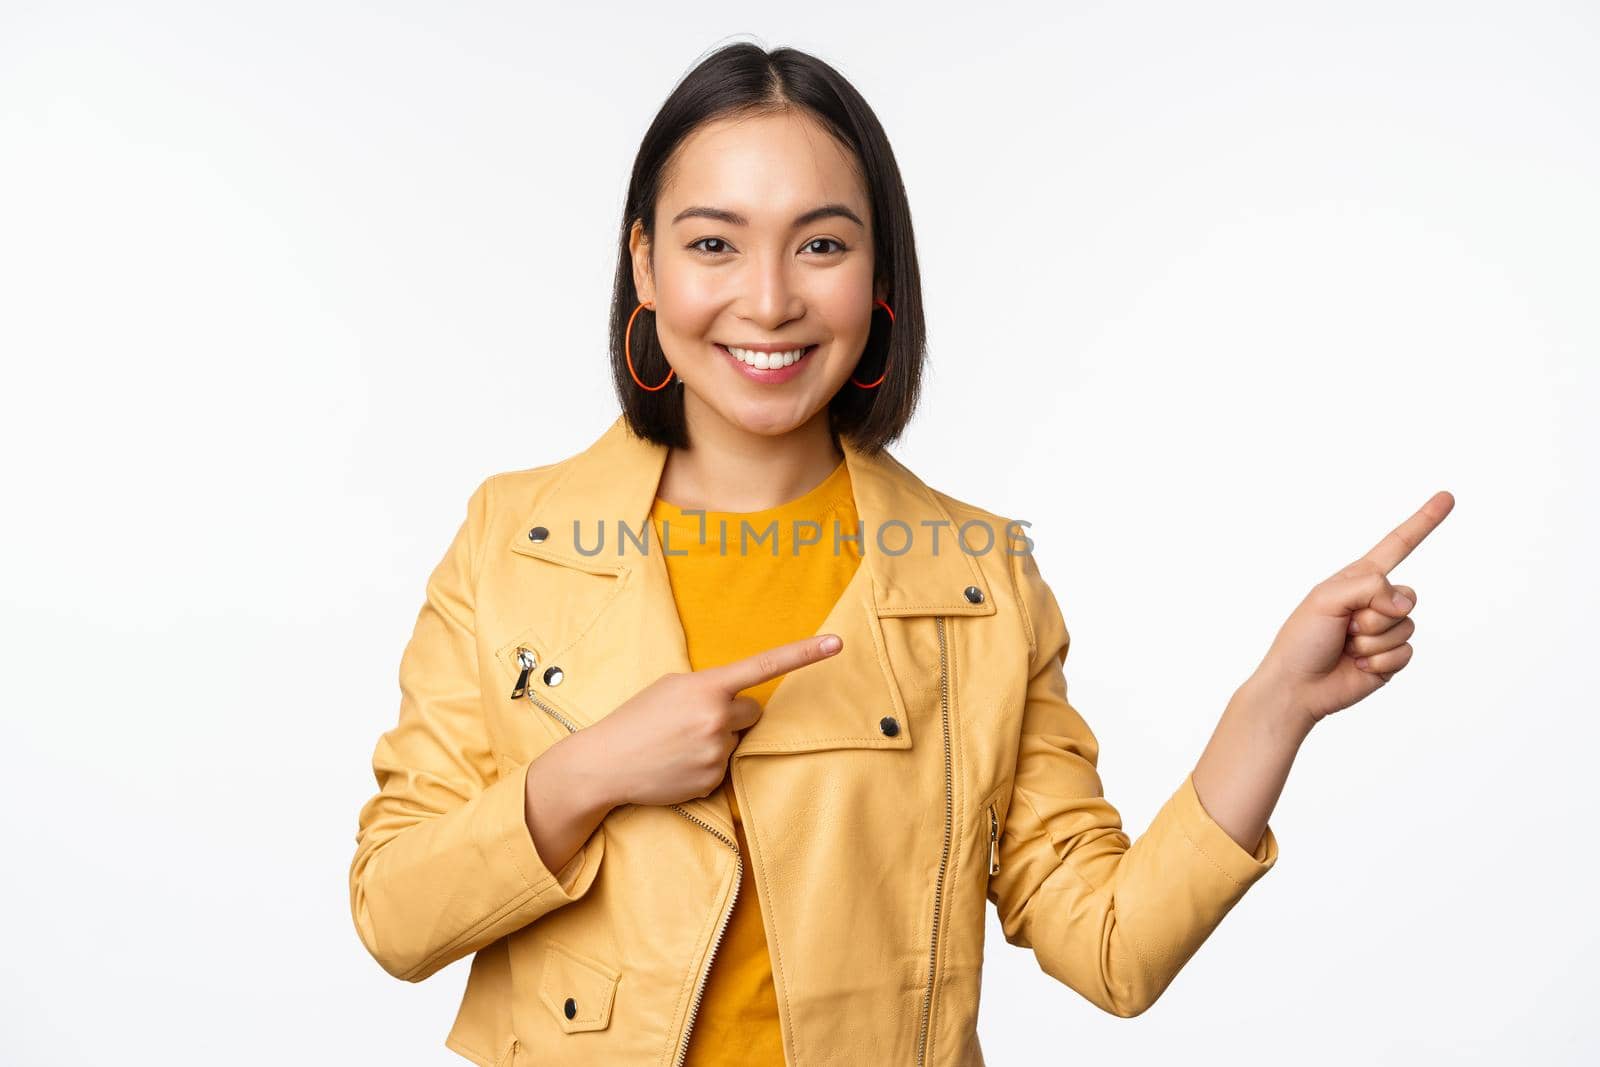 Happy asian woman smiling, pointing fingers right, inviting to check out sale, showing advertisement banner or logo, standing over white background.